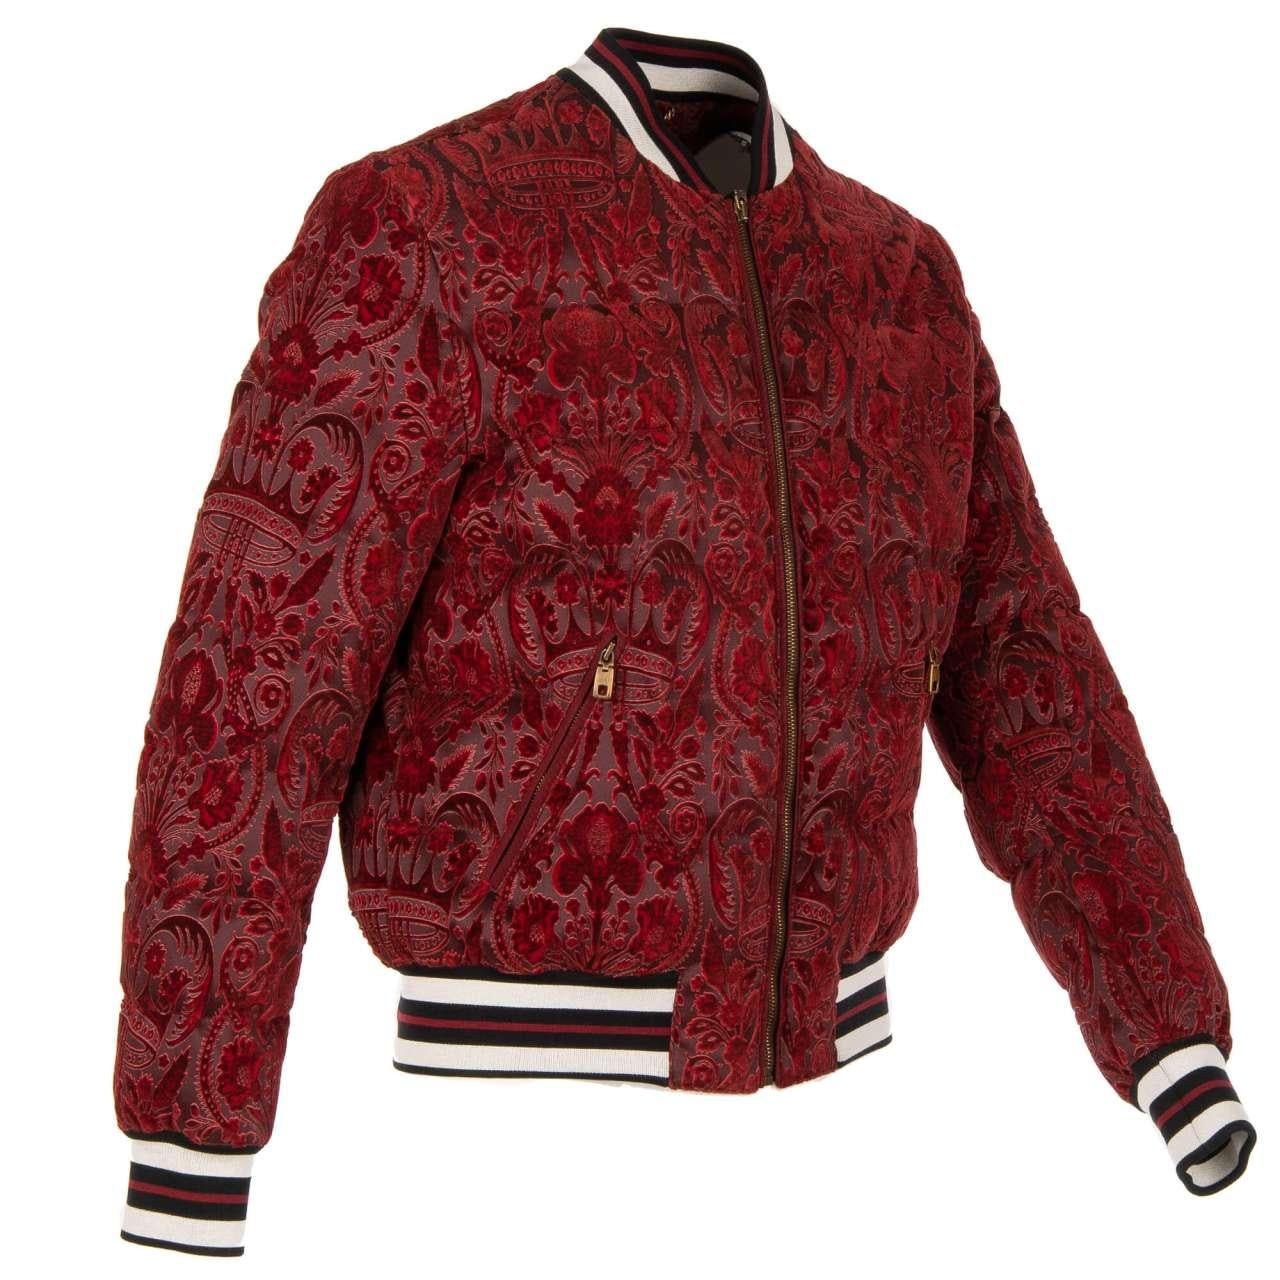 Dolce & Gabbana Down Bomber Jacket with Baroque Brocade Crowns Red 44 In Excellent Condition For Sale In Erkrath, DE